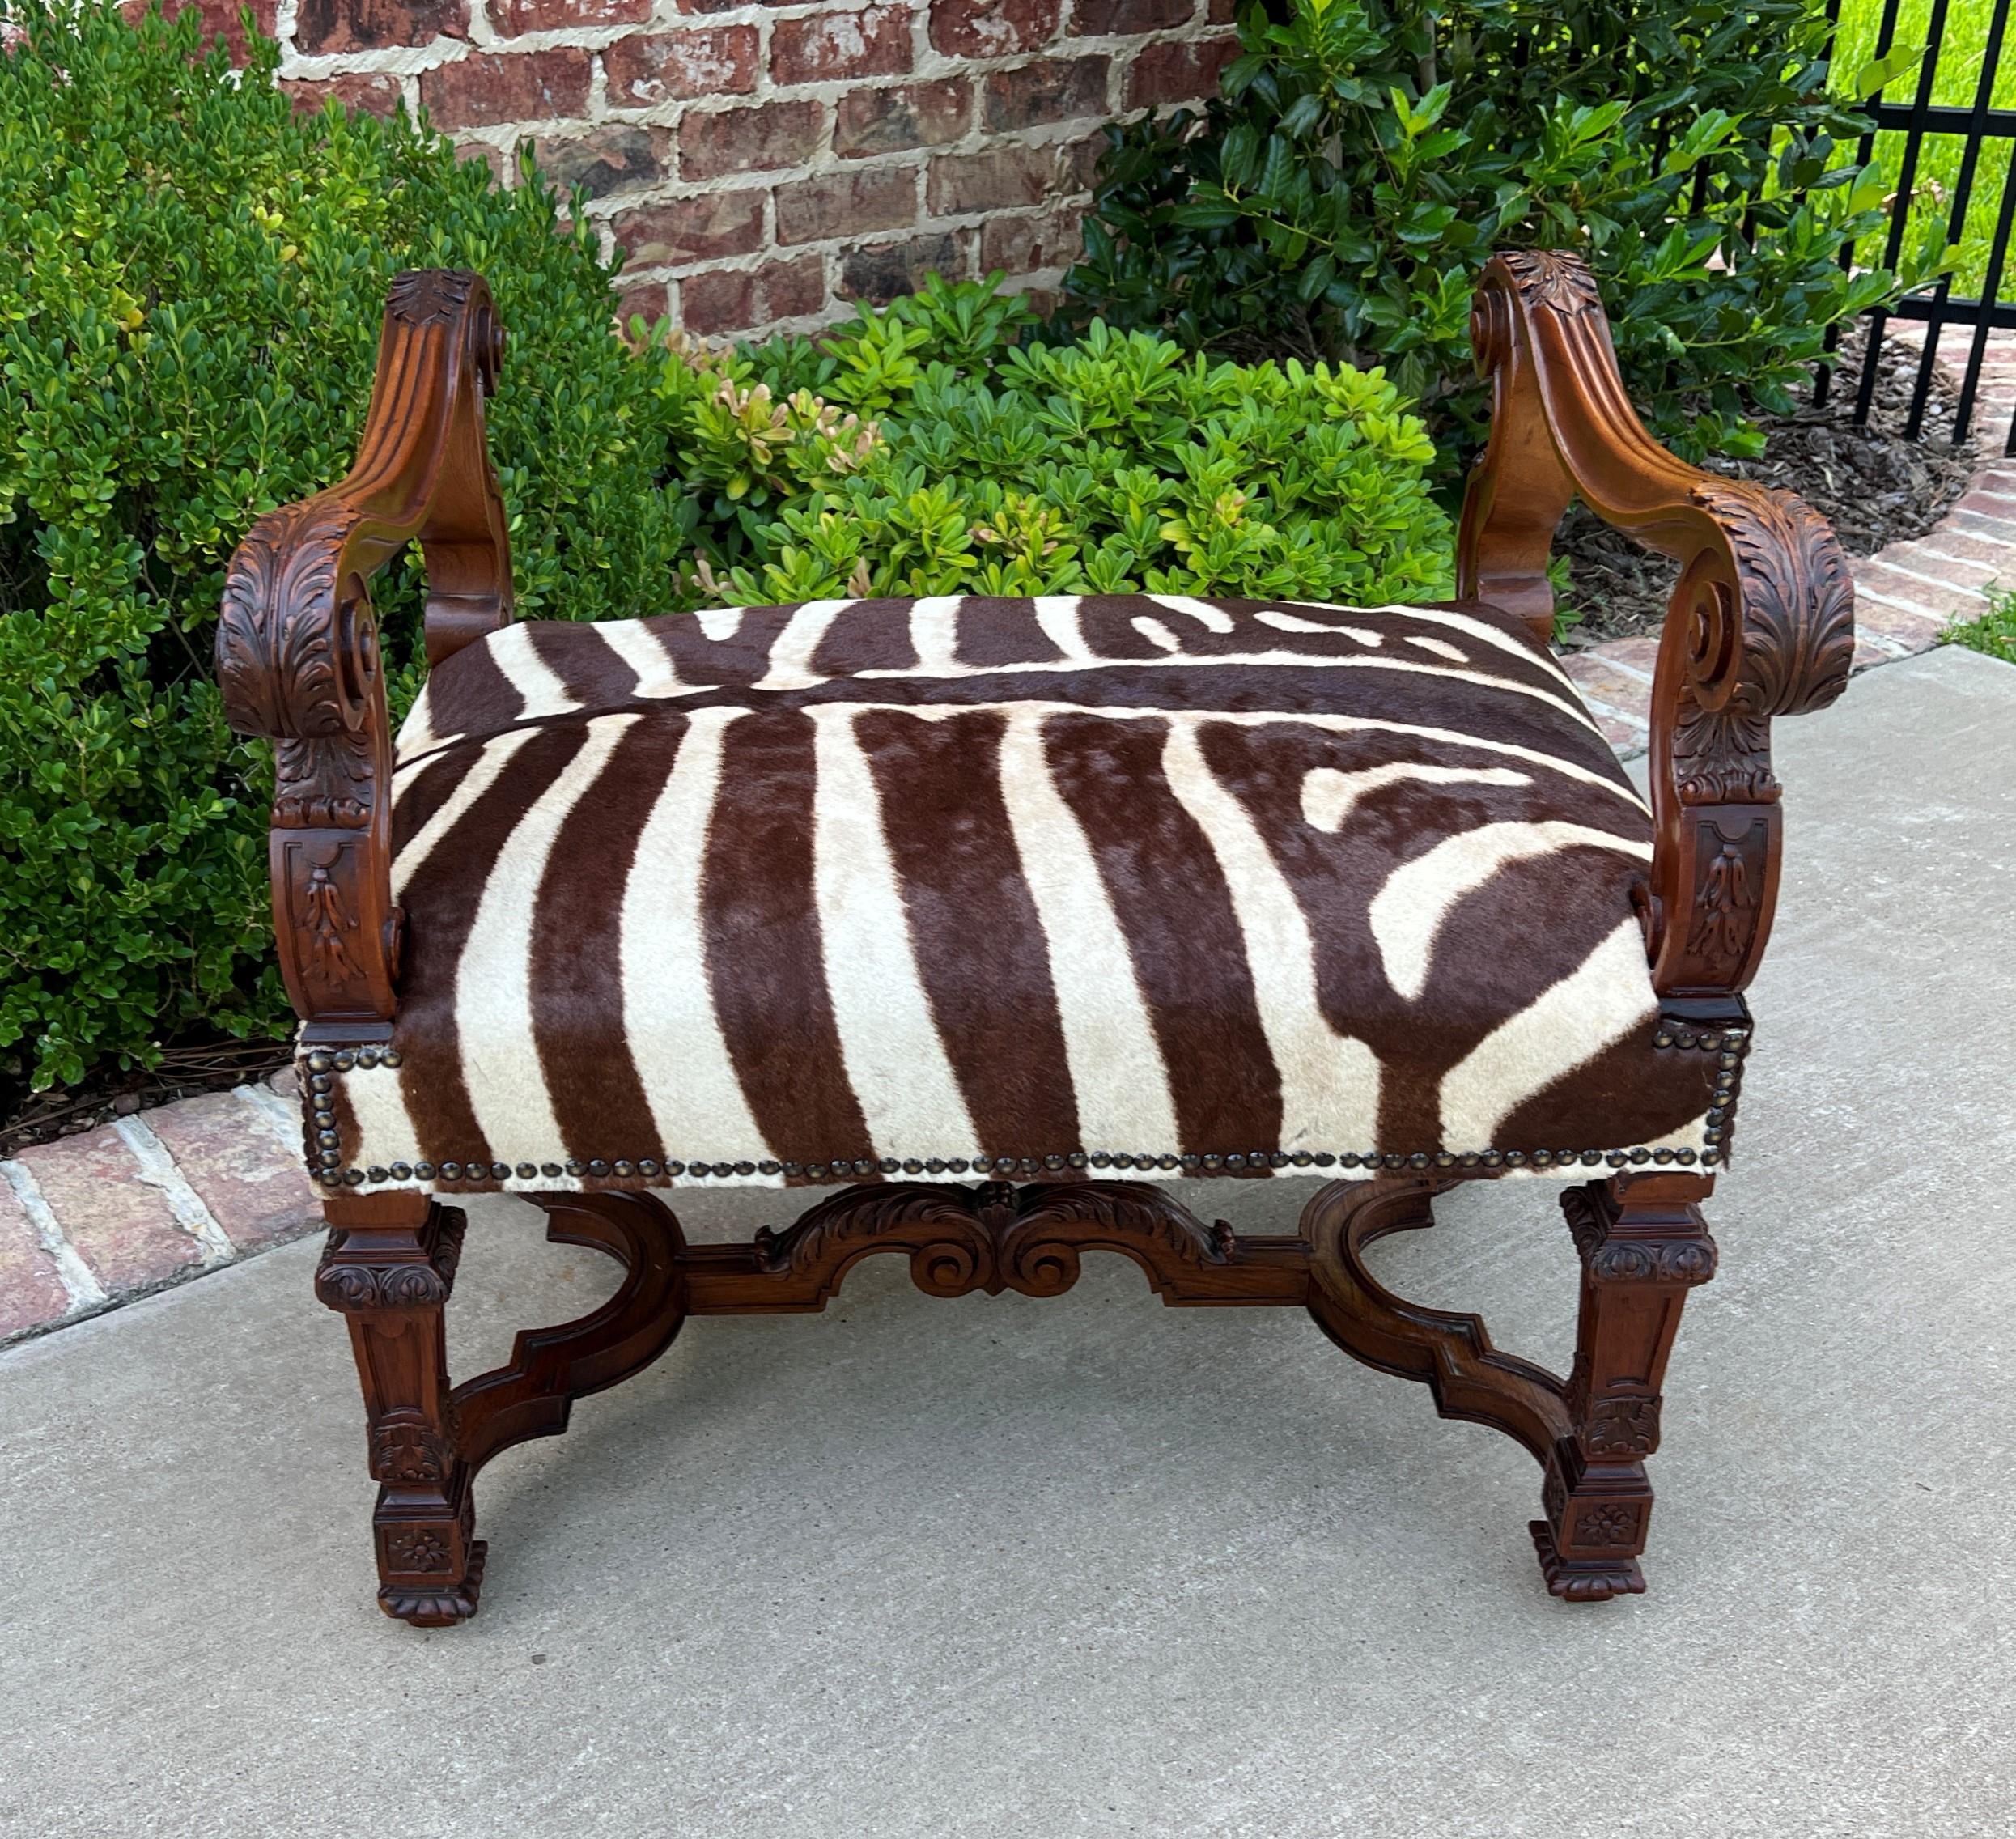 Carved Antique French Bench Chair Settee Renaissance Revival Zebra Hide Walnut 19th C